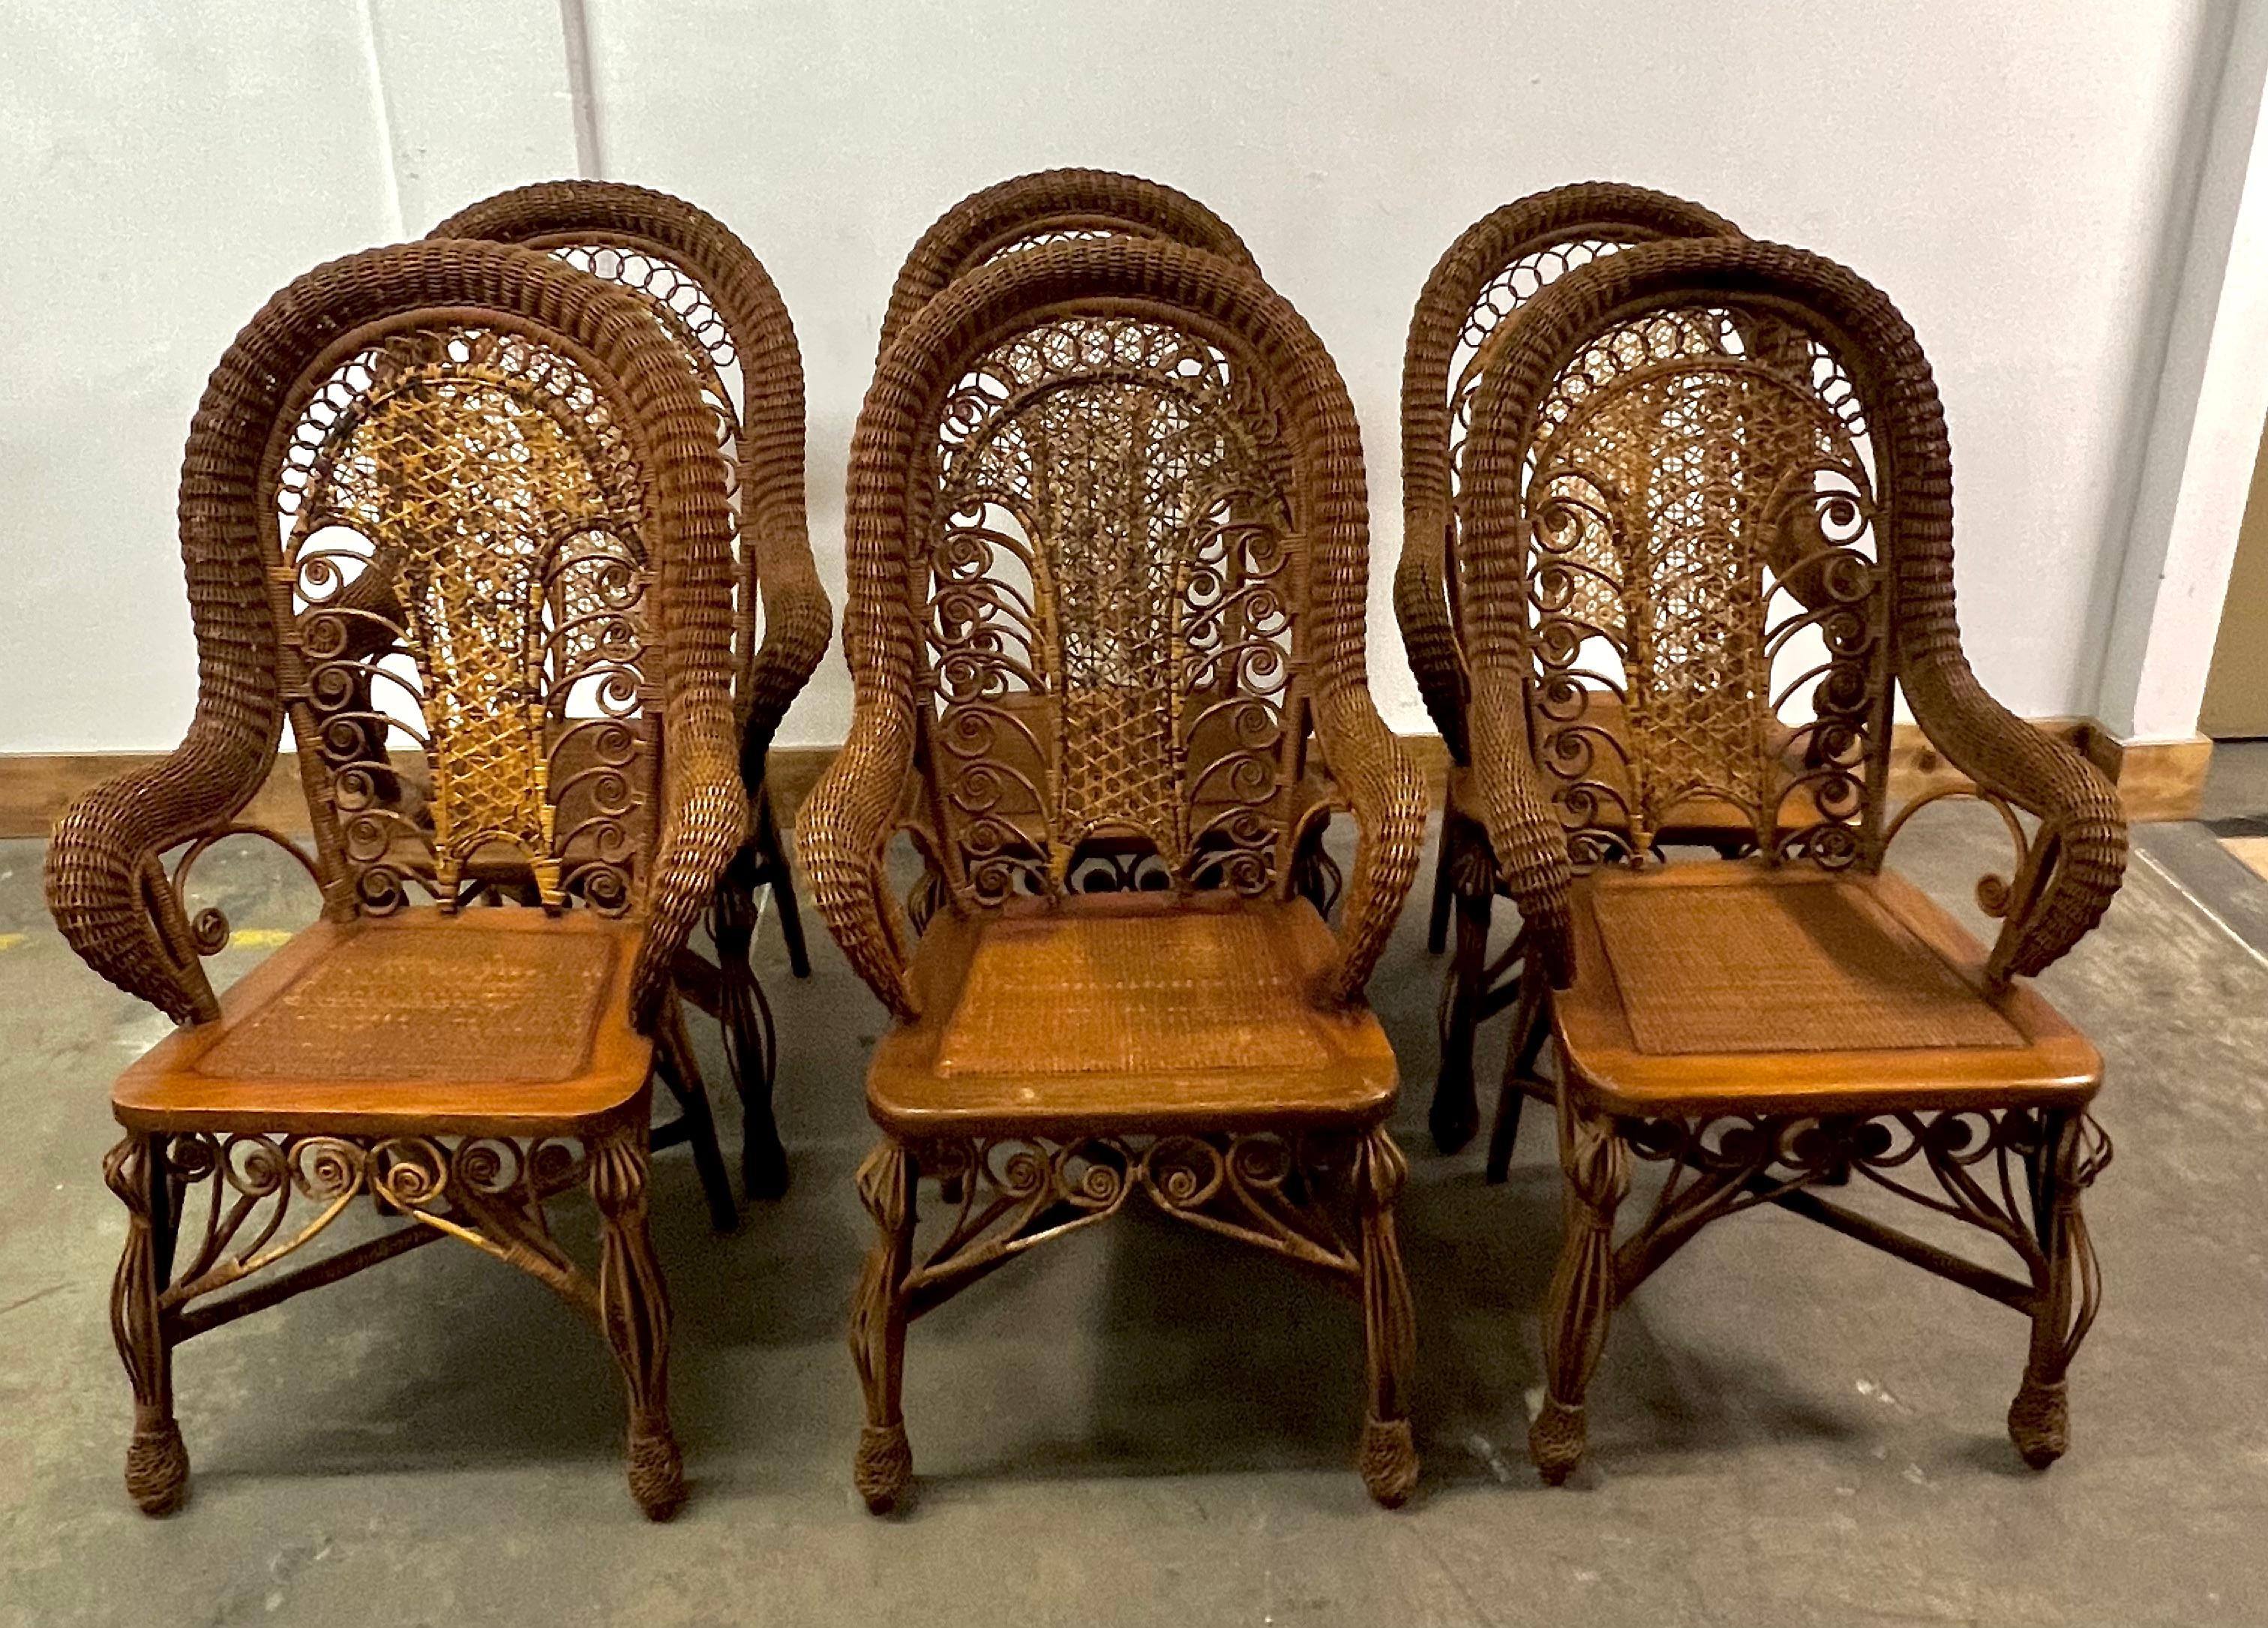 A wonderful set of 6 Wicker chairs. All handcrafted and intricately done. Table is also available please see our listing LU908333614222

A compliment to many settings - if you are a wicker fan these are for you! perfect for any dining room, but